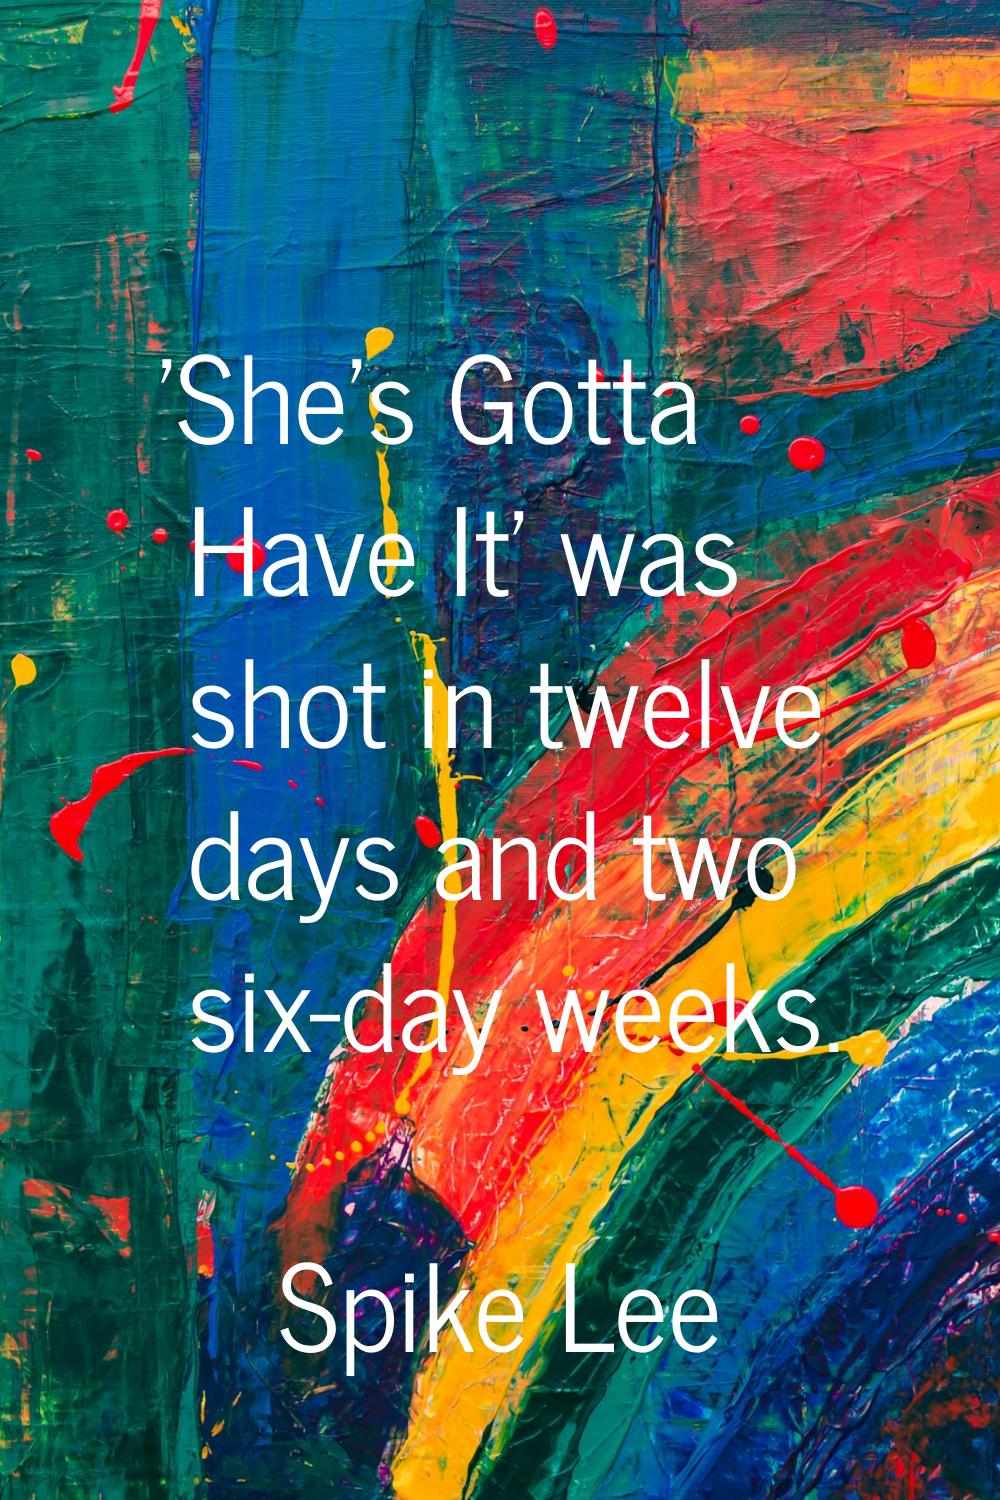 'She's Gotta Have It' was shot in twelve days and two six-day weeks.